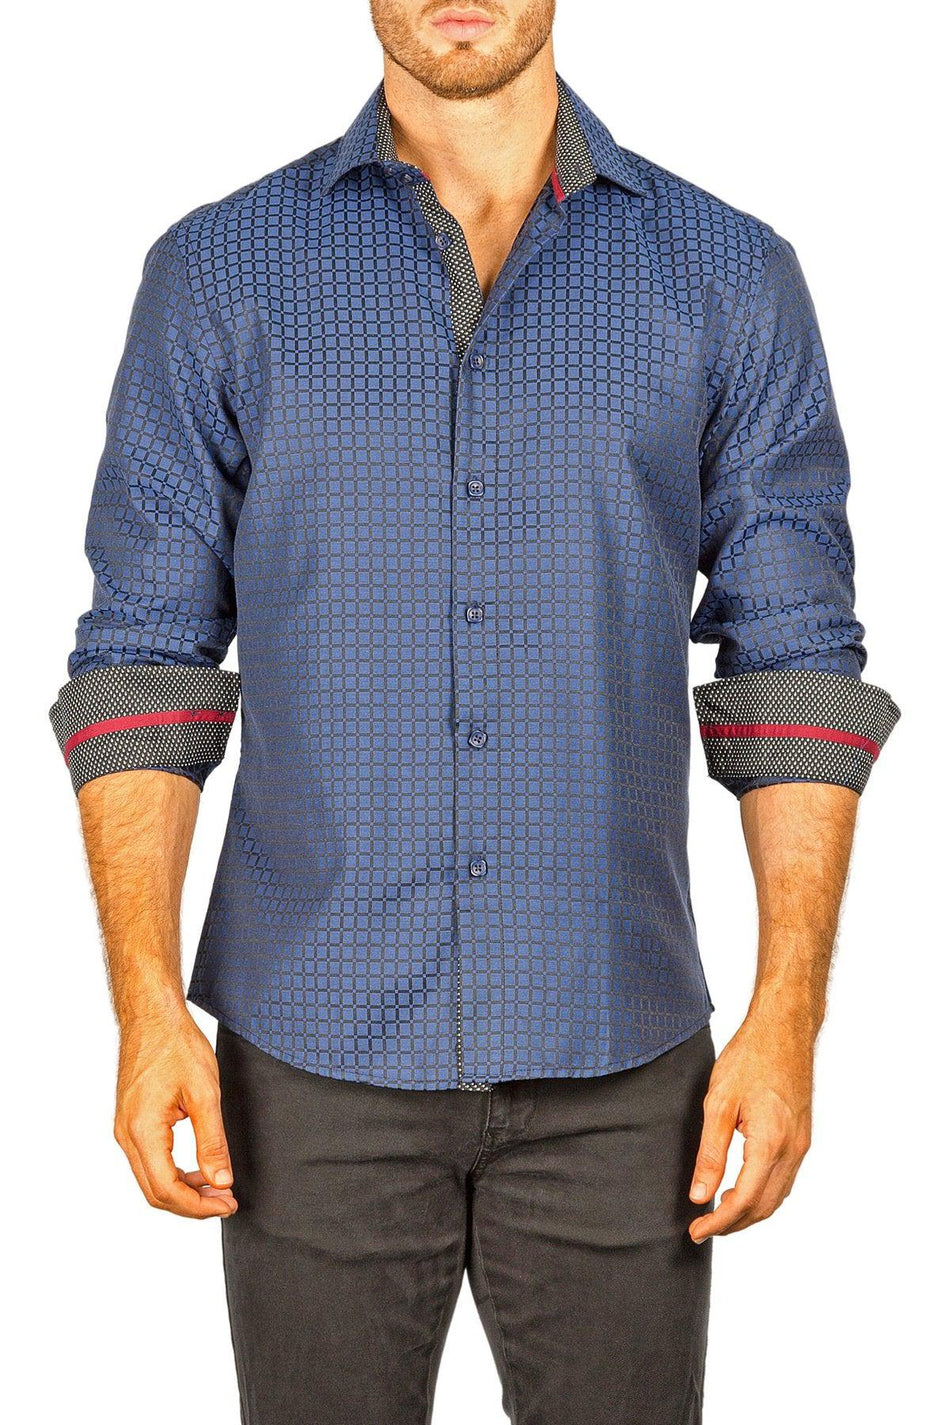 Men's Modern Fit Cotton Button Up Navy Square Pattern